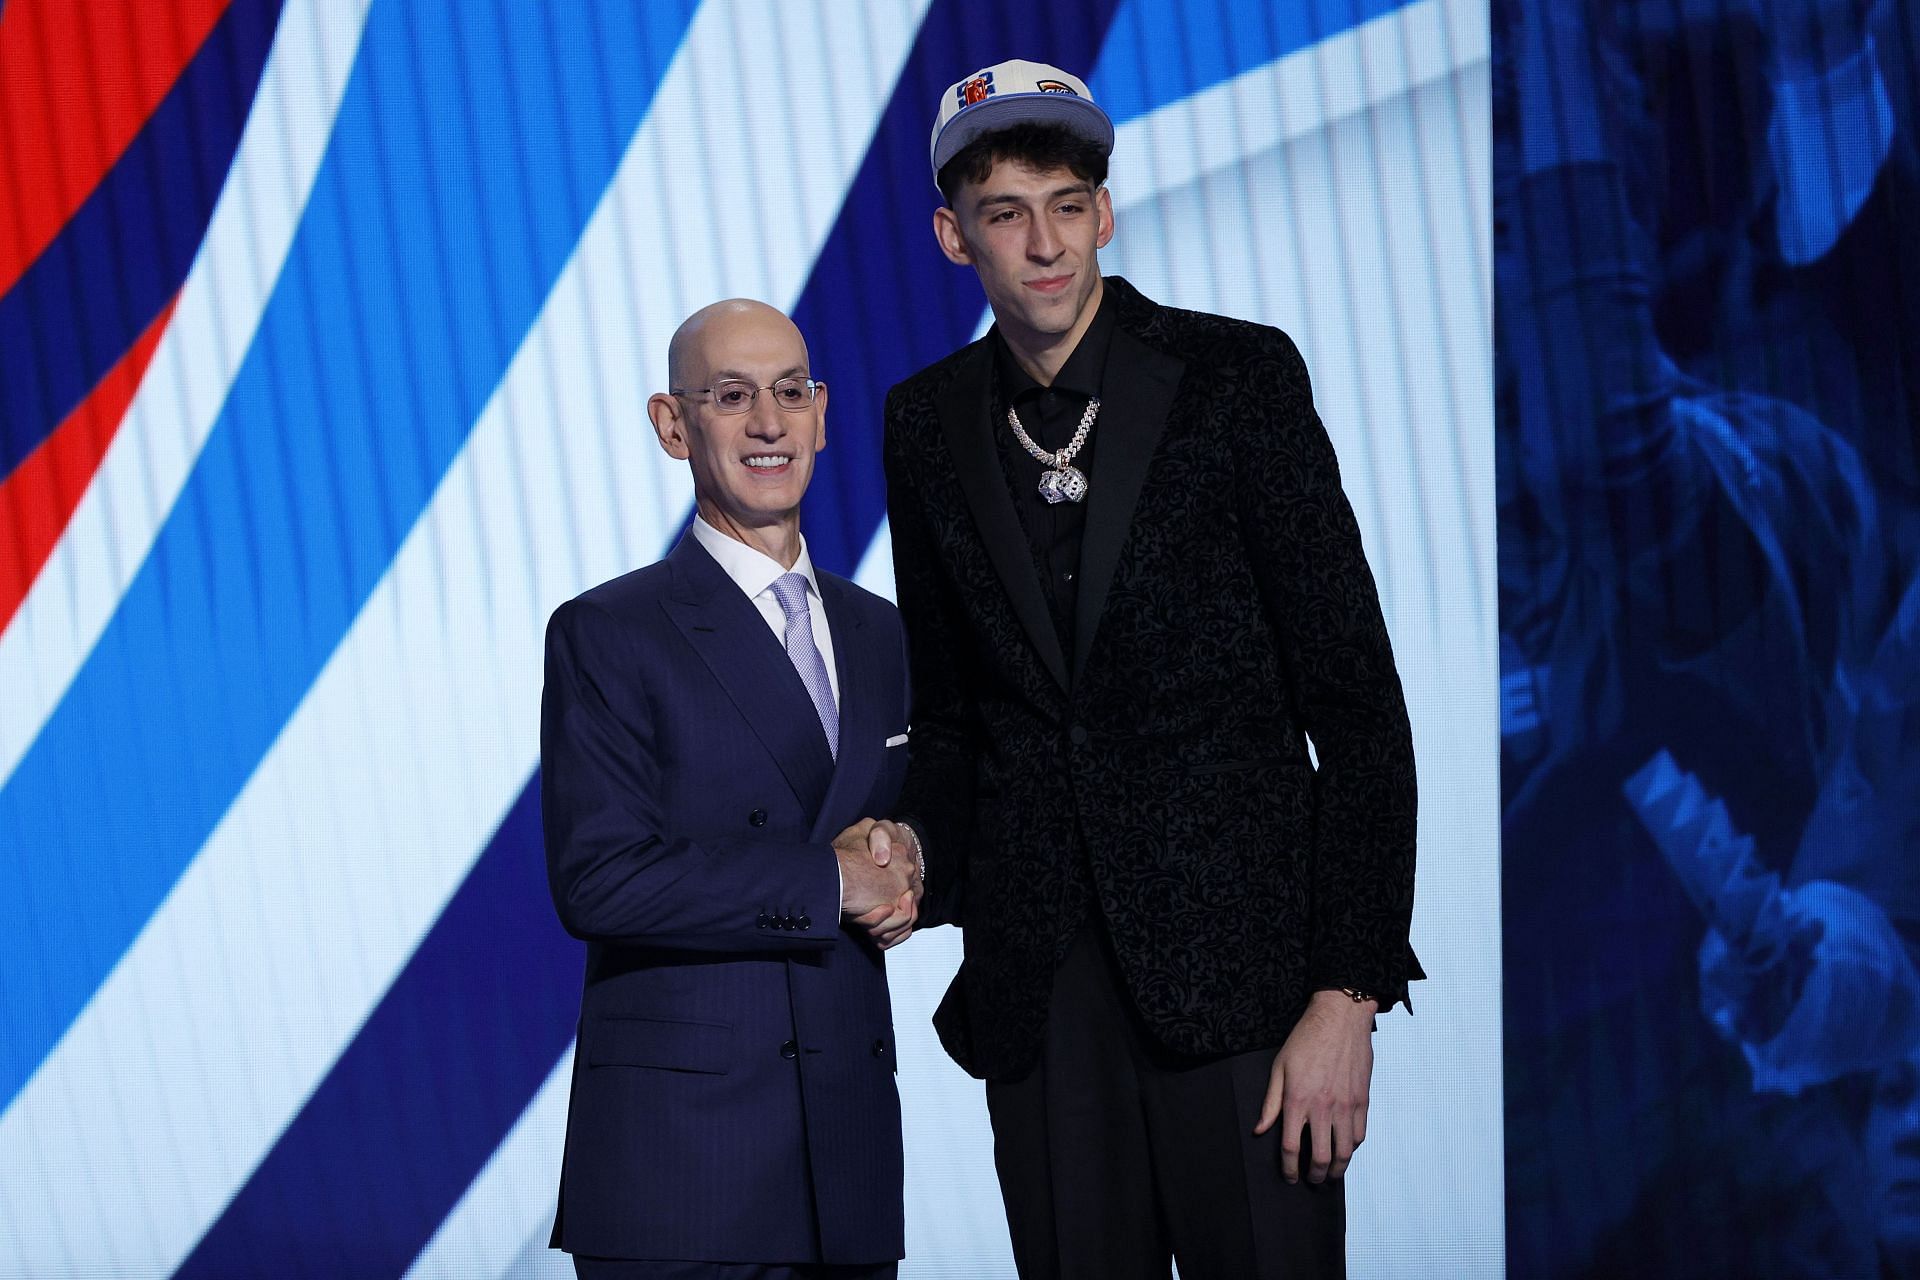 Commissioner Adam Silver with Chet Holmgren after Holmgren was selected at the 2022 NBA draft